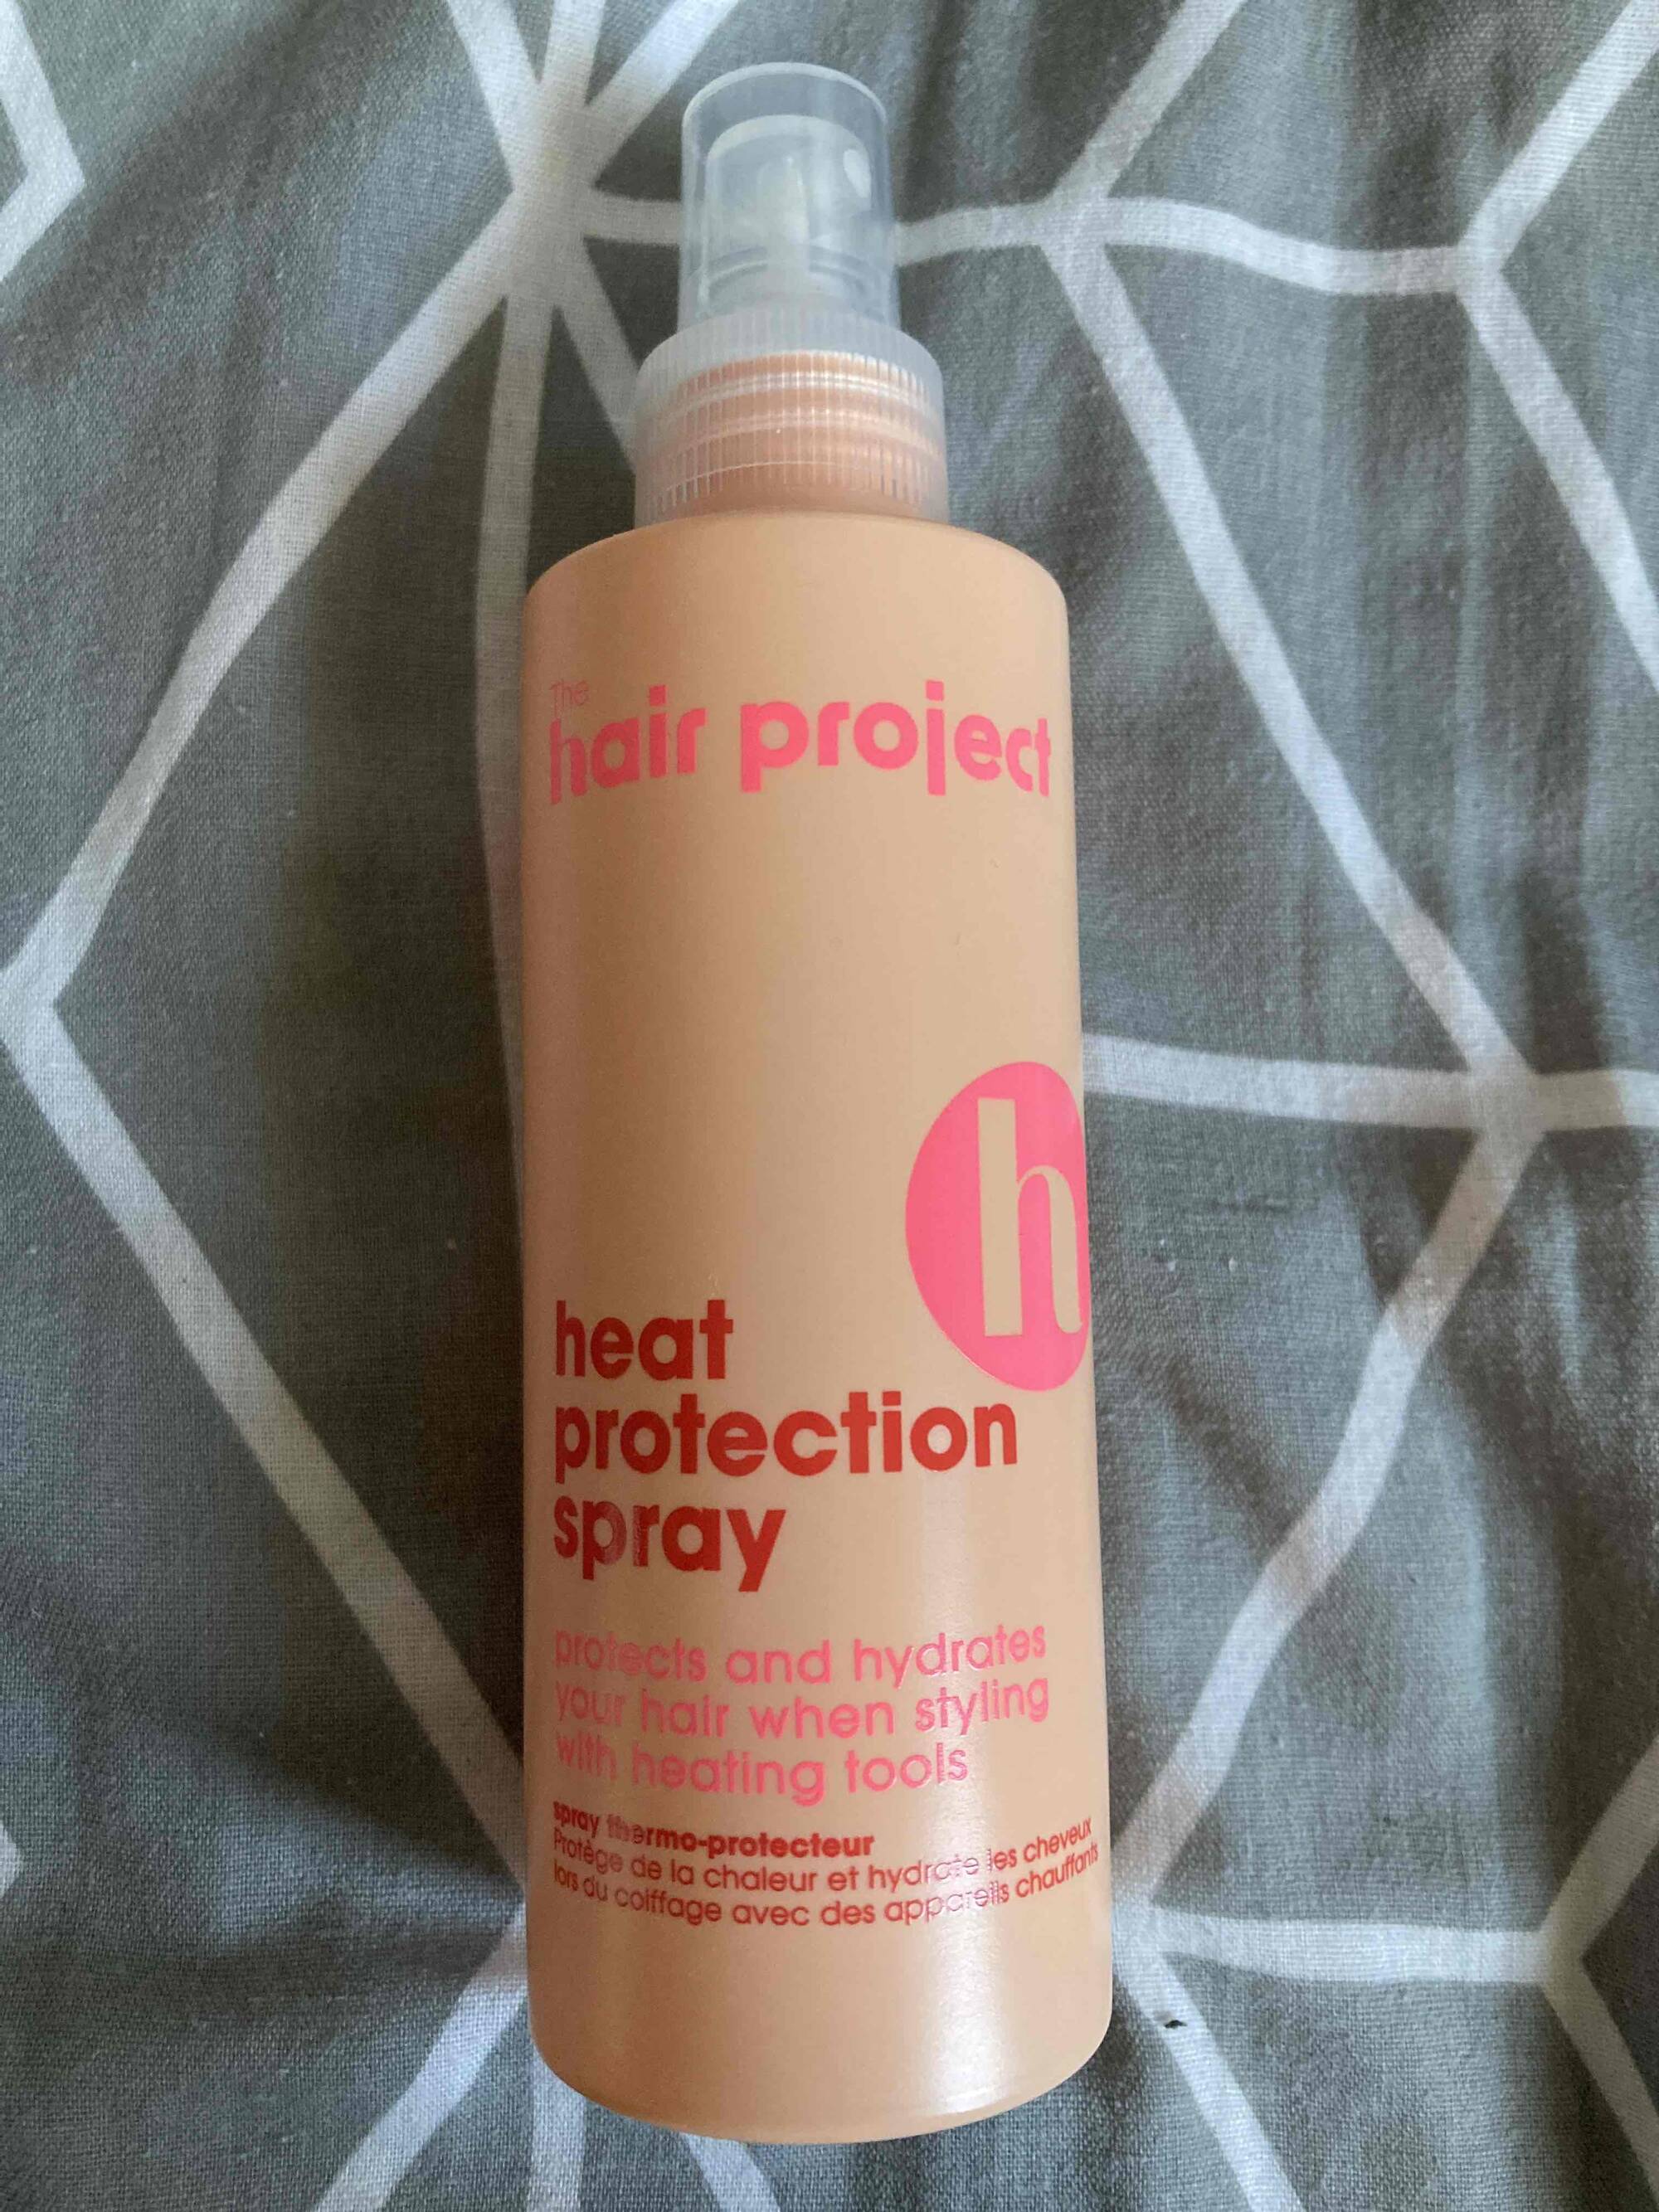 HAIR PROJECT - heat protection spray